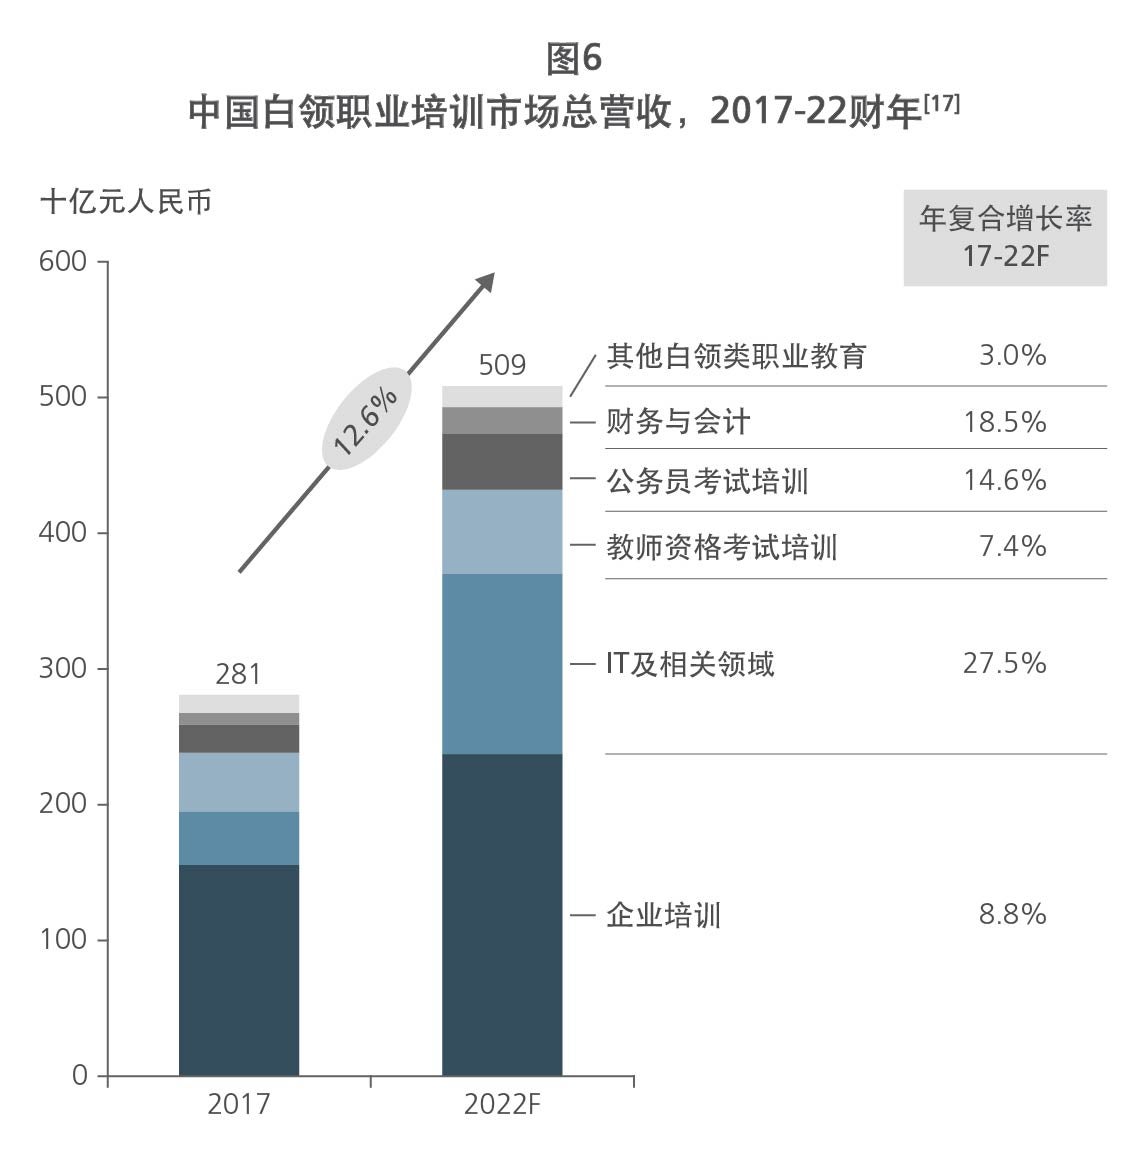 Total revenue of China white-collar vocational education market 2017-22F